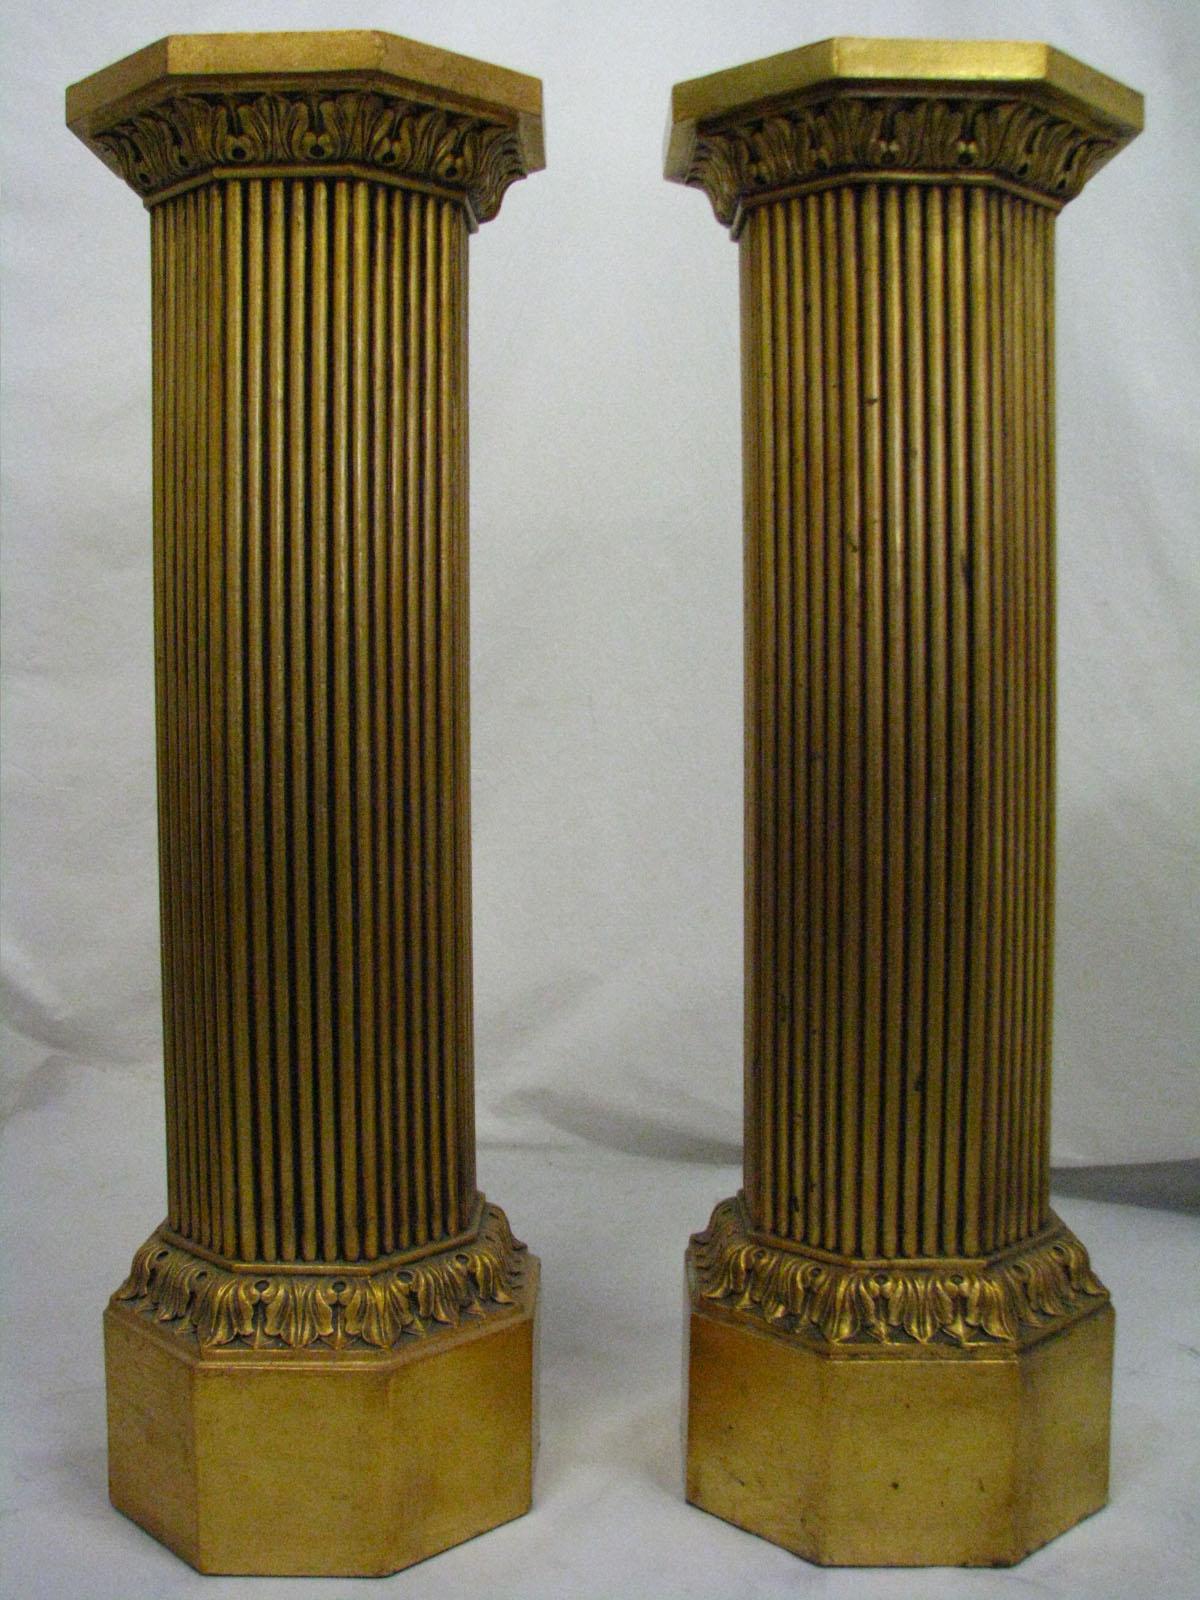 A very interesting pair of two identical, slightly more than a meter high pedestals made entirely of wood and gilded, in the form of octagonal columns with channeled stems, topped with pseudo heads of stylized acanthus leaves and tops.
An effective